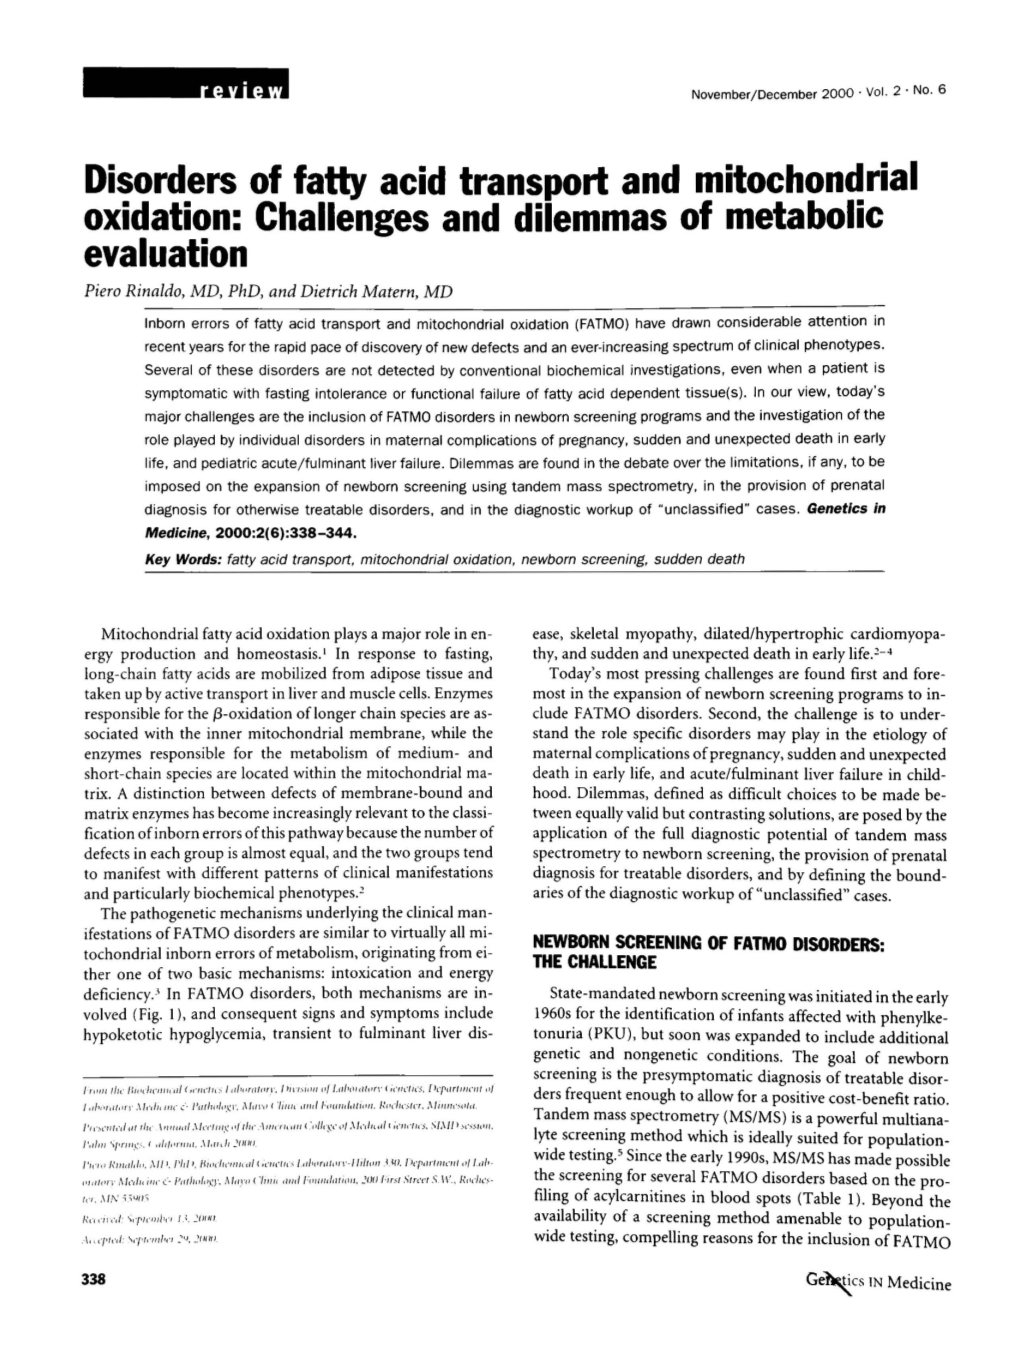 Disorders of Fatty Acid Transport and Mitochondrial Oxidation: Challenges and Dilemmas of Metabolic Evaluation Piero Rinaldo, MD, Phd, and Dietrich Matern, MD